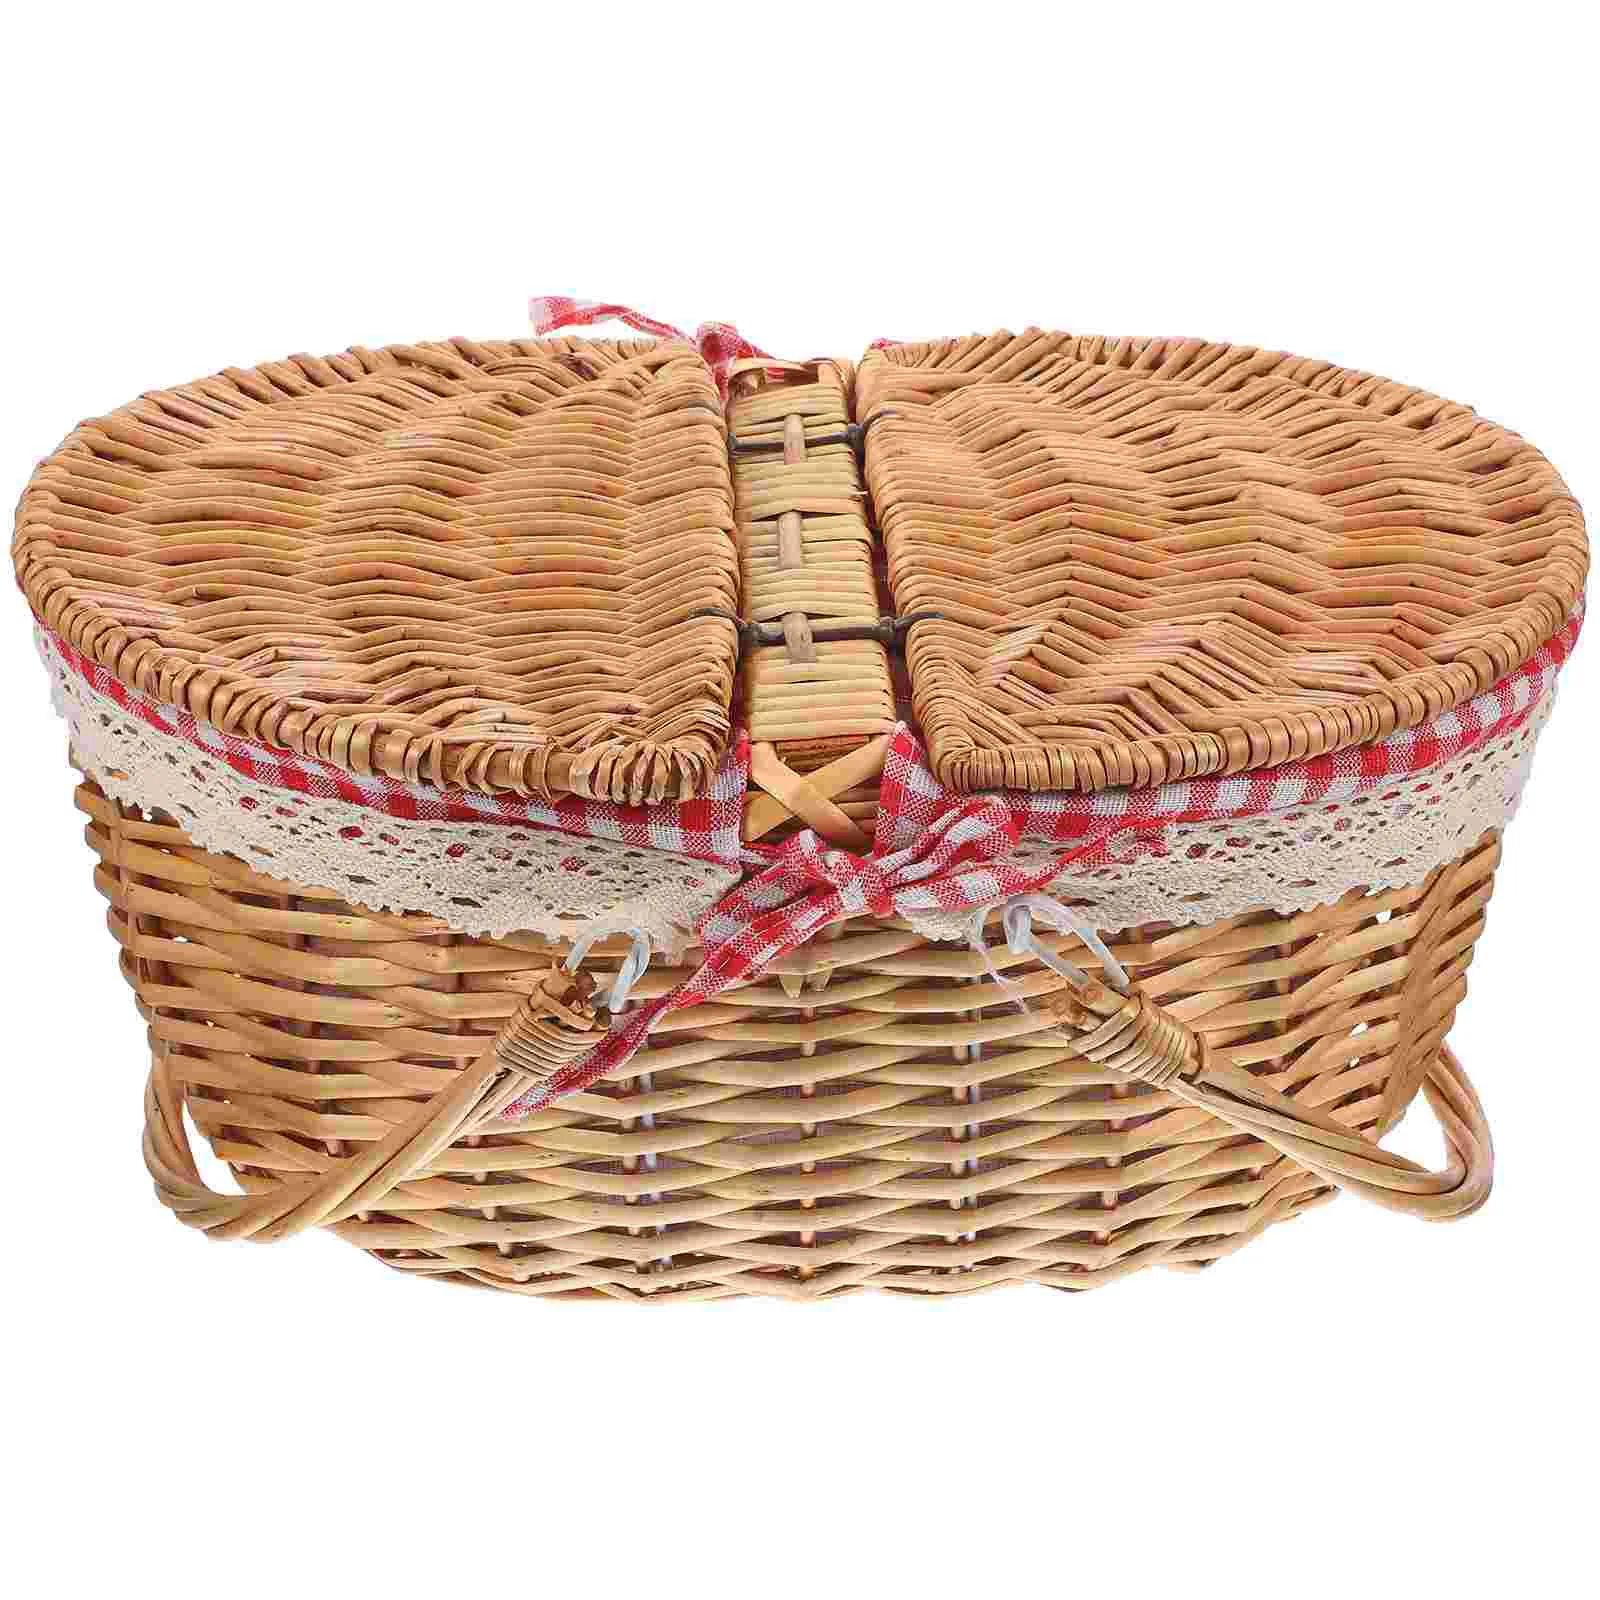 

Picnic Basket Seagrass Baskets Hamper Basketball Wicker with Handles Rustic Camping Rural Woven